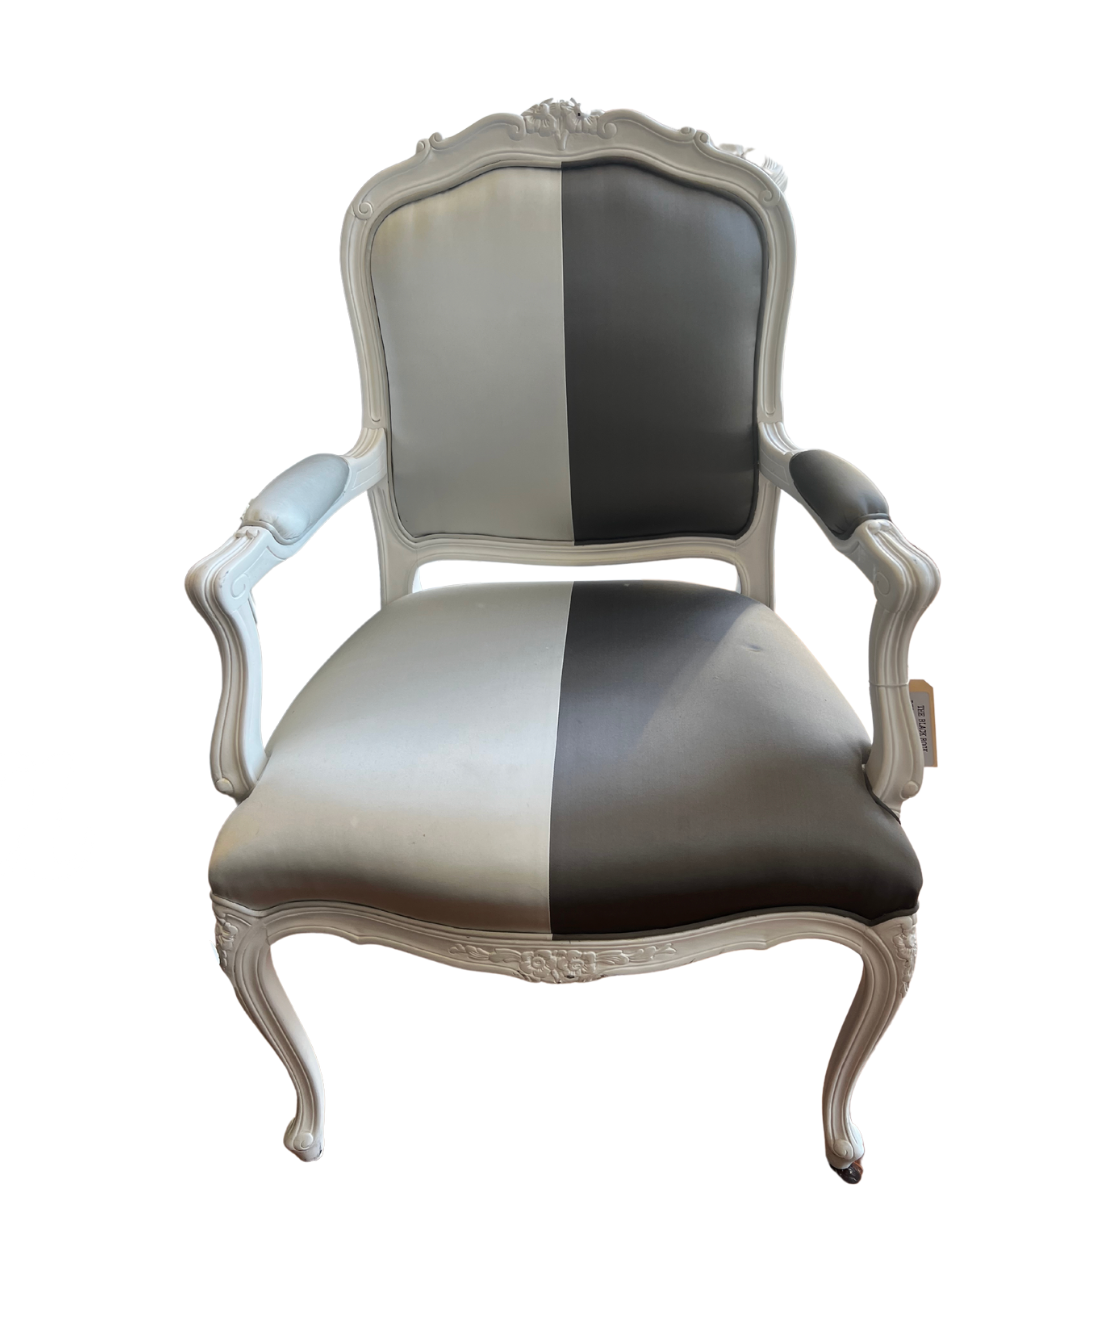 Pair of Grey and White Striped Satin Chairs